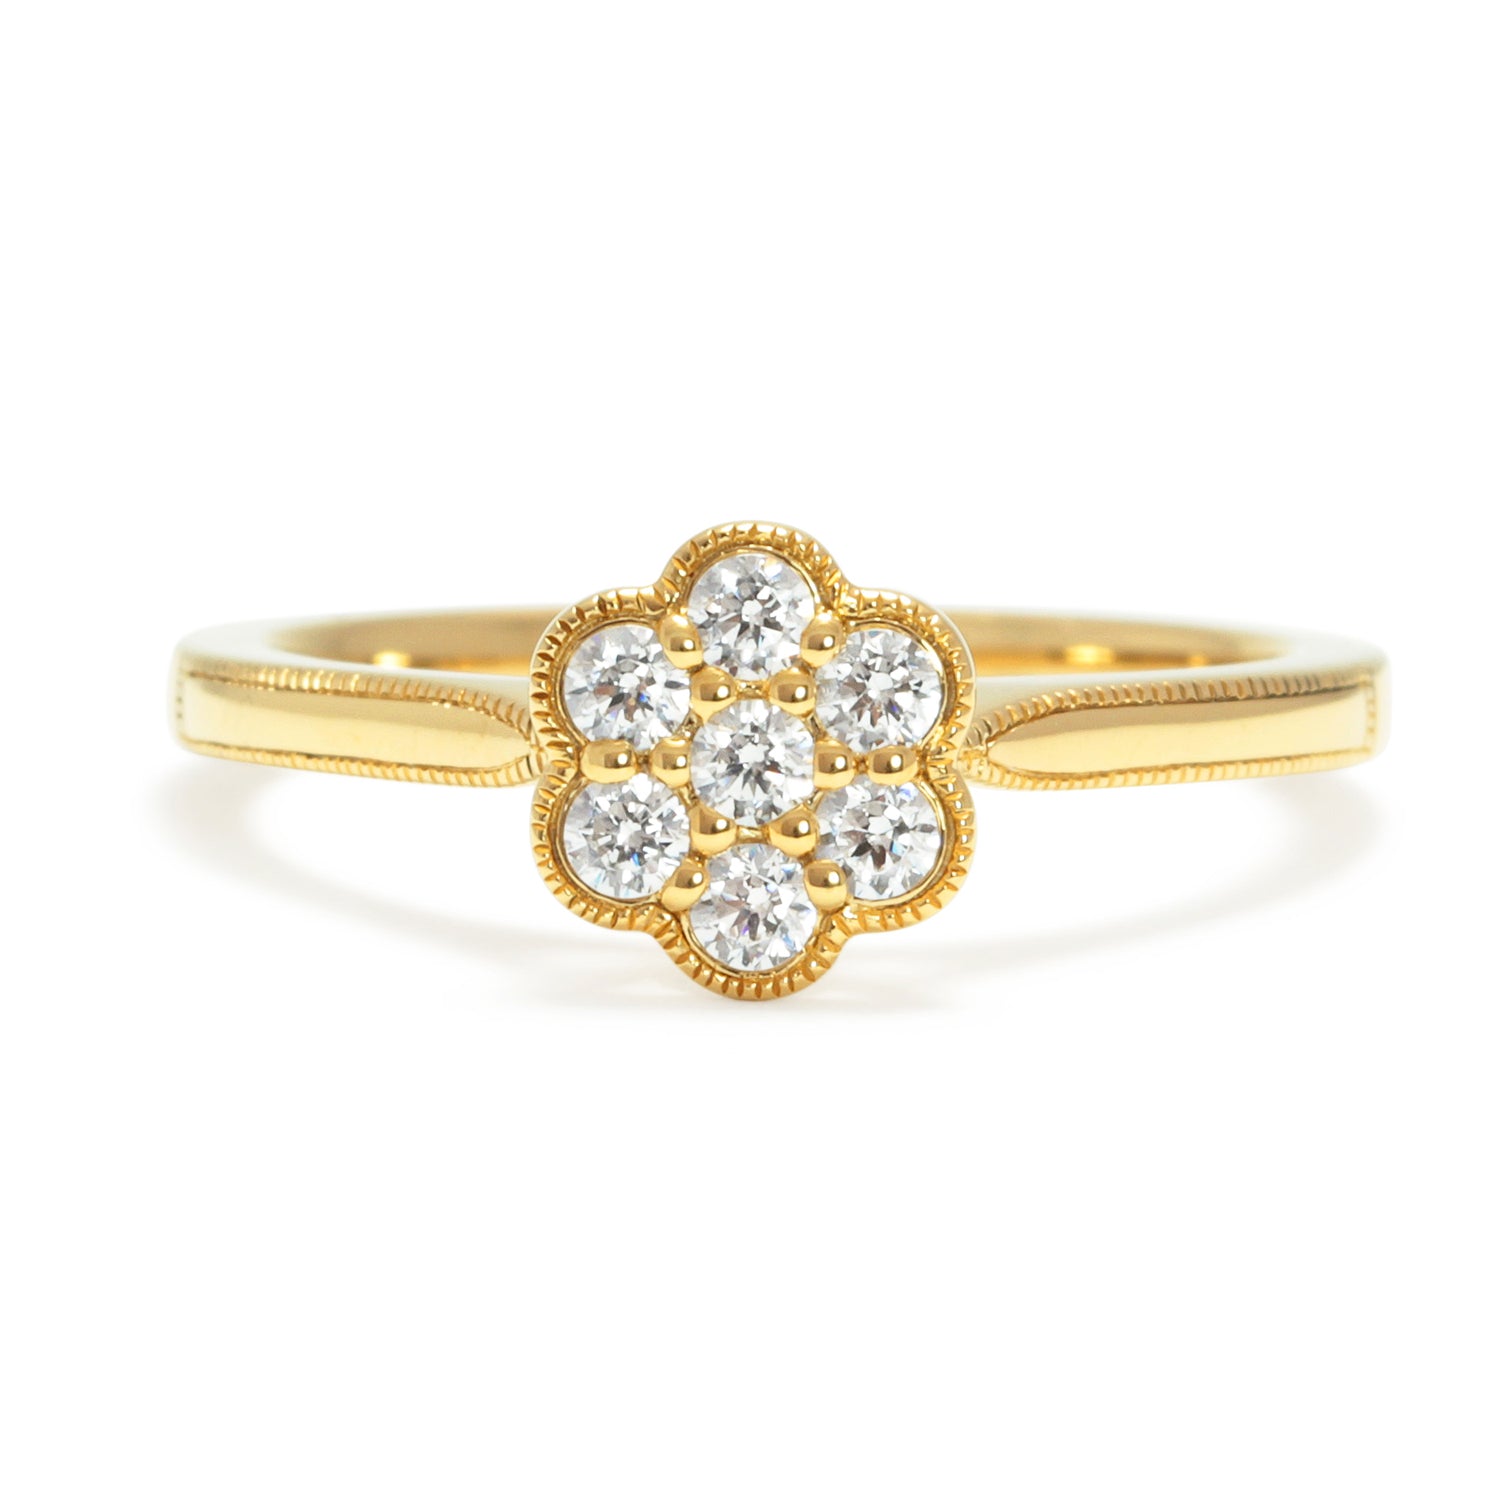 Daisy Ethical Diamond Cluster Engagement Ring with traceable and conflict-free Canadian diamonds and 100% recycled yellow gold